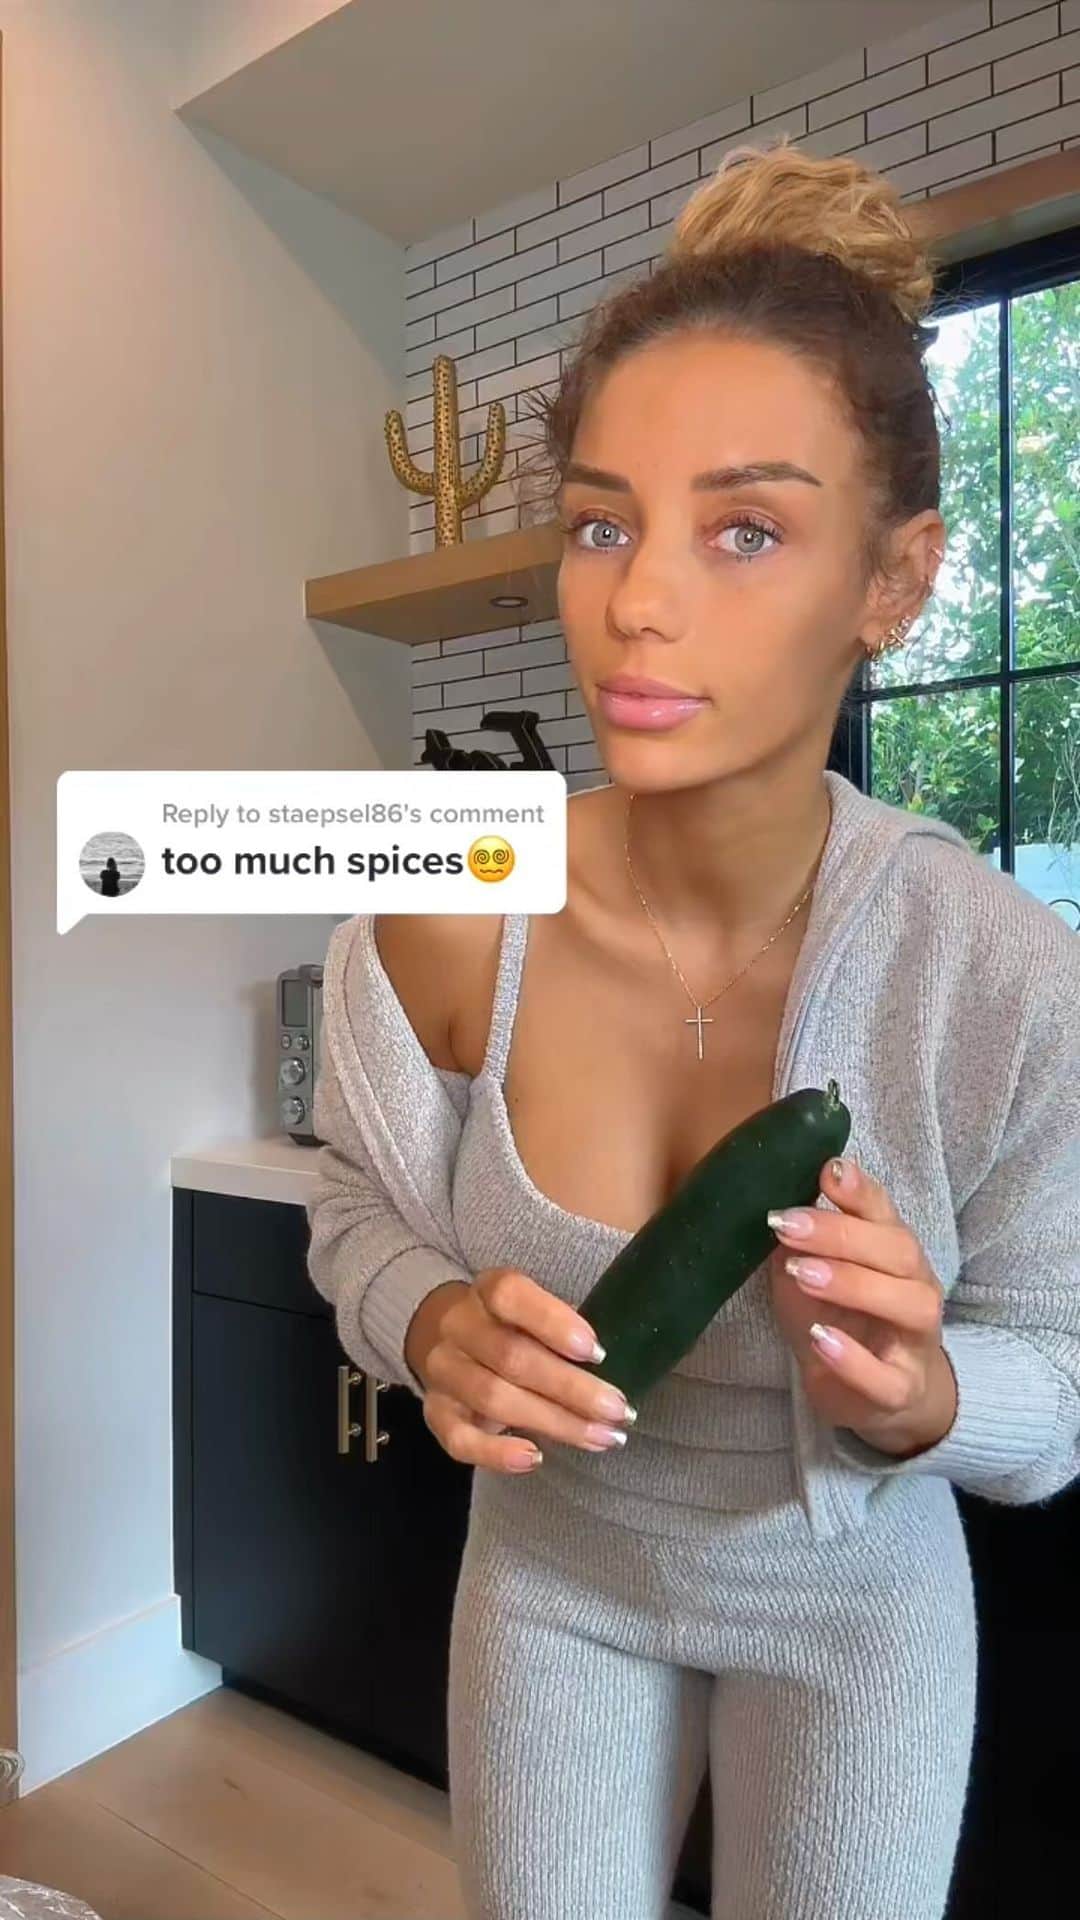 Jena Frumesのインスタグラム：「The internet will say you’re always doing something wrong😫 Can never win. Anyways … I did in fact do something wrong i cut the cucumber first thinking it was a zucchini, so I ate the cucumber. 🤣 Ingredients  1 Onion 🧅  1 Zucchini  1 Carrot 🥕  1 Celery  A lot of Spinach because it shrinks  1 Can Crushed Tomatoes 🍅  1 pound ground turkey  Garlic 🧄  Spices of Choice I used Chicken Bullion, Italian seasoning, salt, pepper, cayenne pepper, garlic powder  We have been avoiding dairy and mushrooms, because it in FACT causes bloating and gas ! However, you can use whatever YOU wish!   1. Sauté onion and garlic with olive oil. 2. Add Veggies rip up spinach to be added  3. Add Turkey Fully cook Turkey before adding sauce  4. Boil water or broth 5. Add Noodles Pasta whatever you wanna call it  6. Drain water  7. Enjoy !   I love these types of meals because they have everything you need so you don’t have to make any other sides or anything 👏🏽」